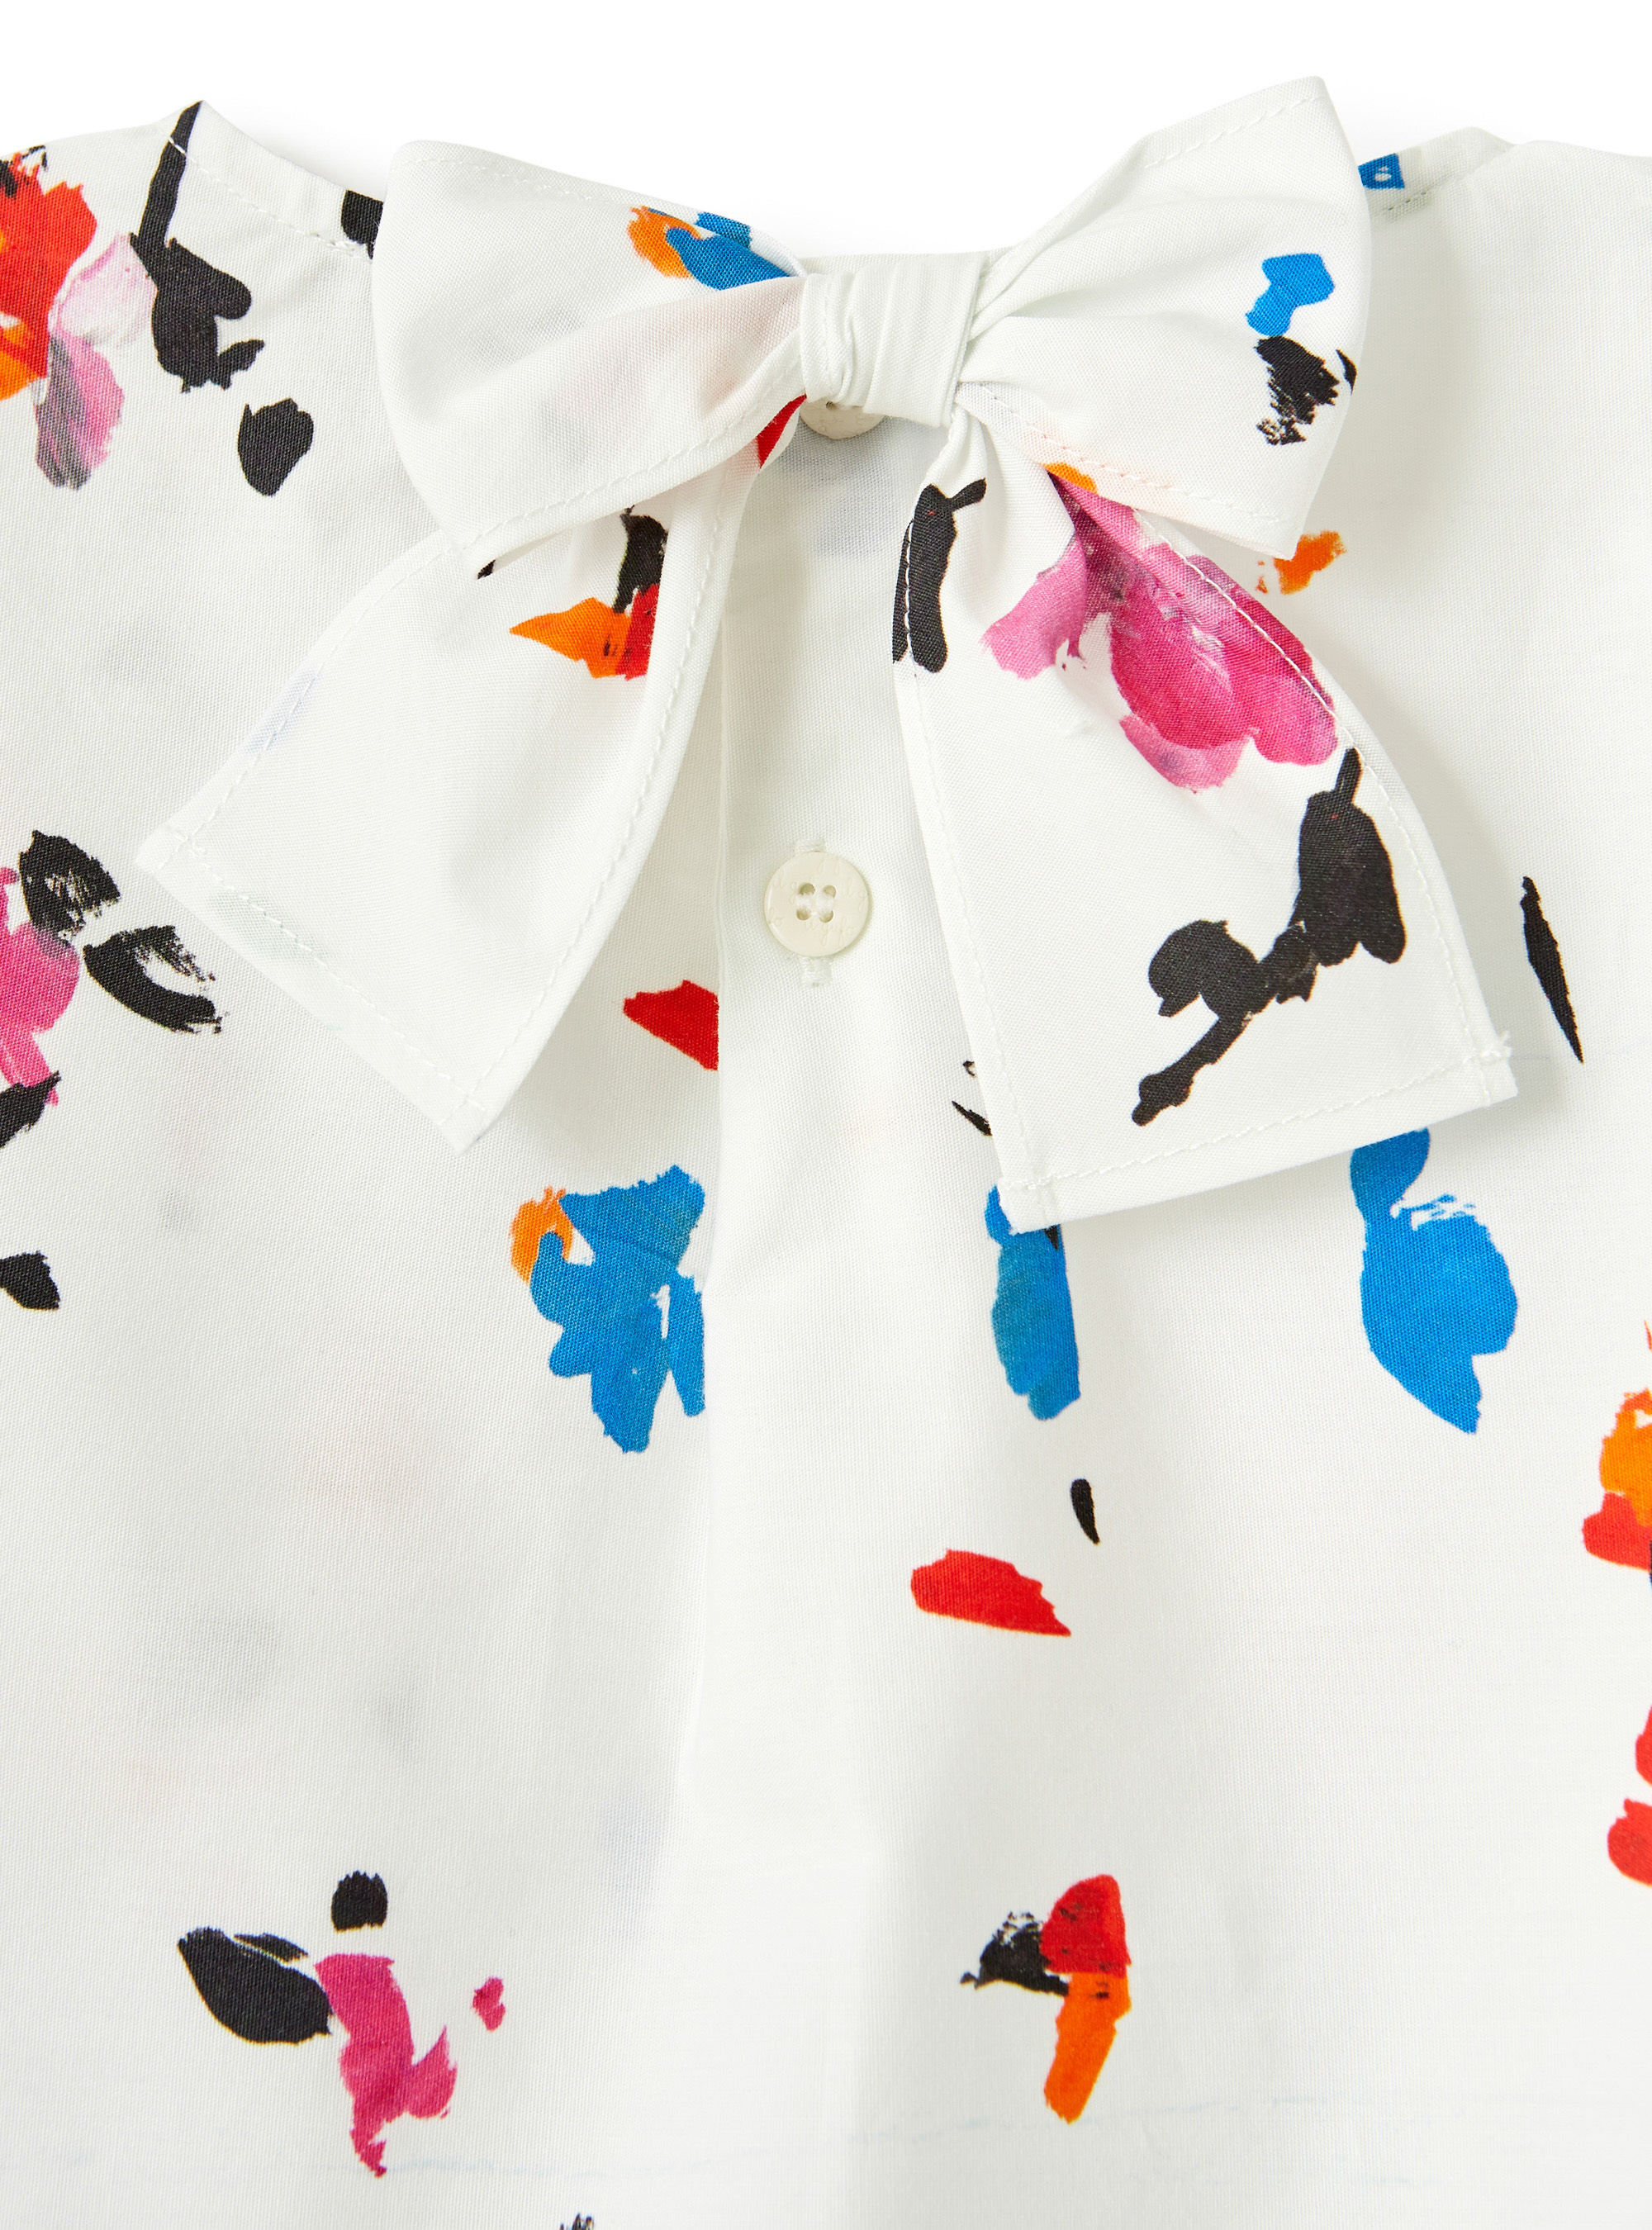 Dress with abstract flower print - Multicolor | Il Gufo